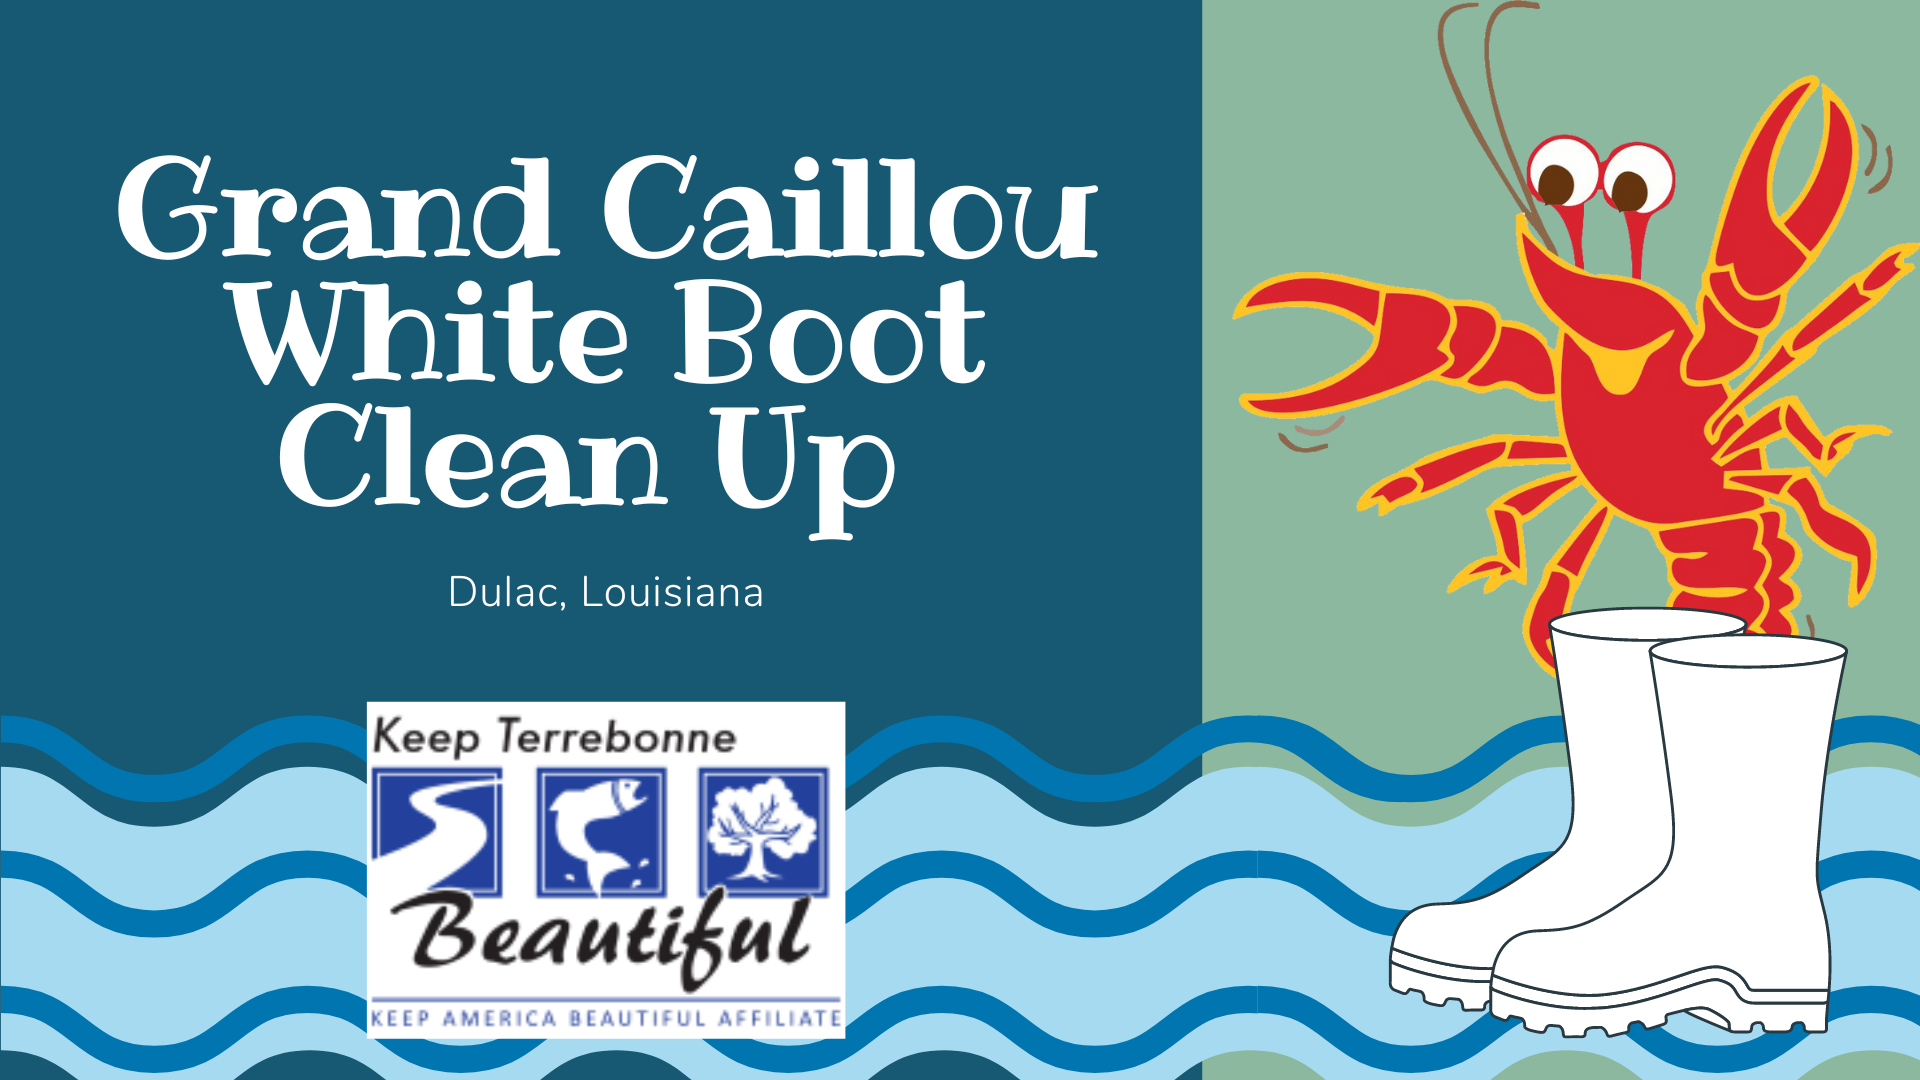 Join Us for the Keep Terrebonne Beautiful Bayou Grand Caillou White Boot Clean Up!